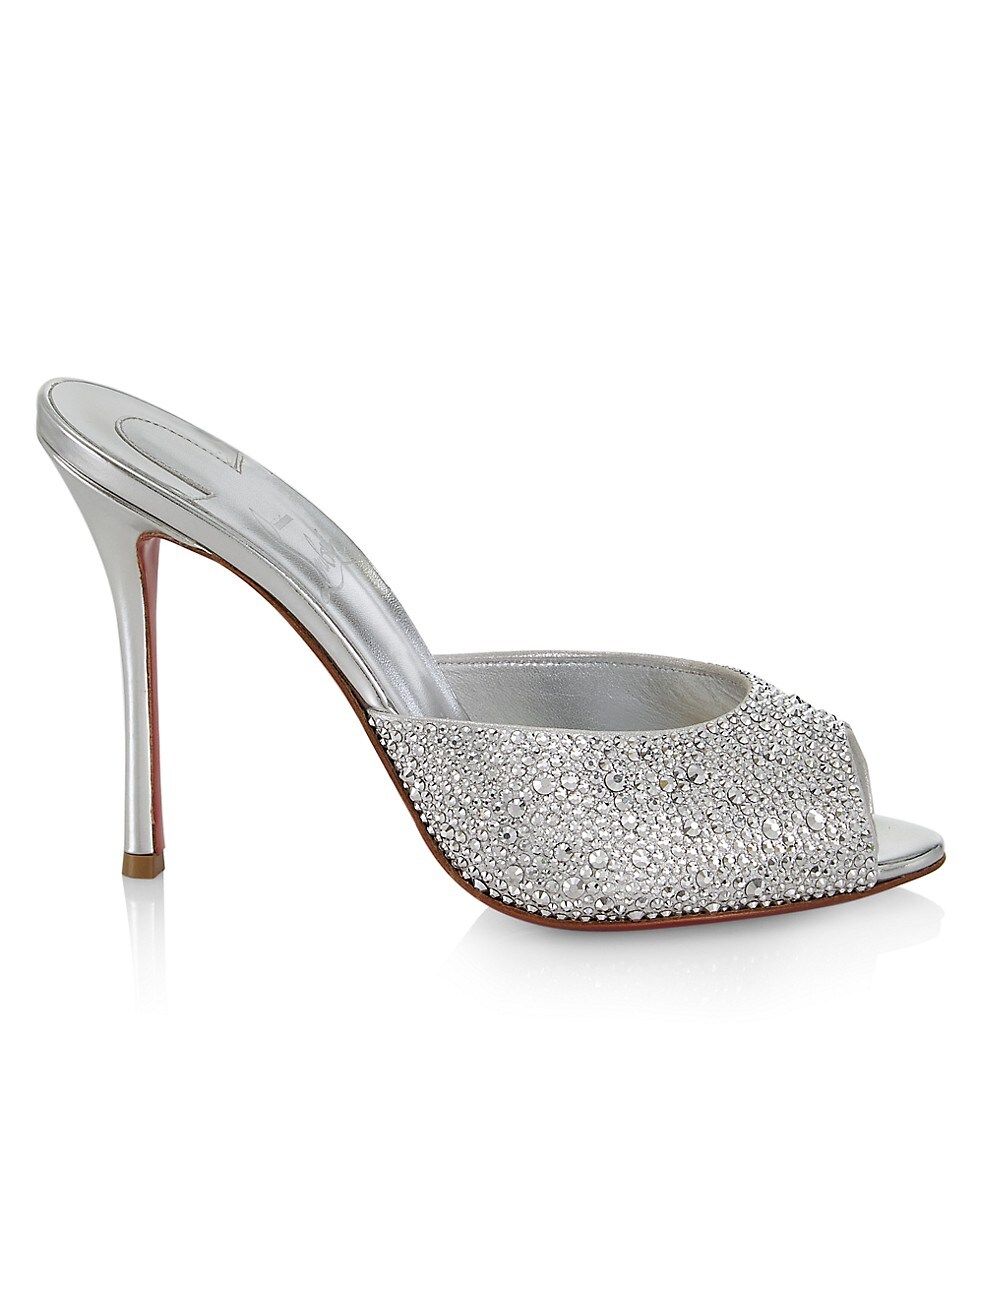 Christian Louboutin Me Dolly 100 Embellished Metallic Suede Mules | Saks Fifth Avenue